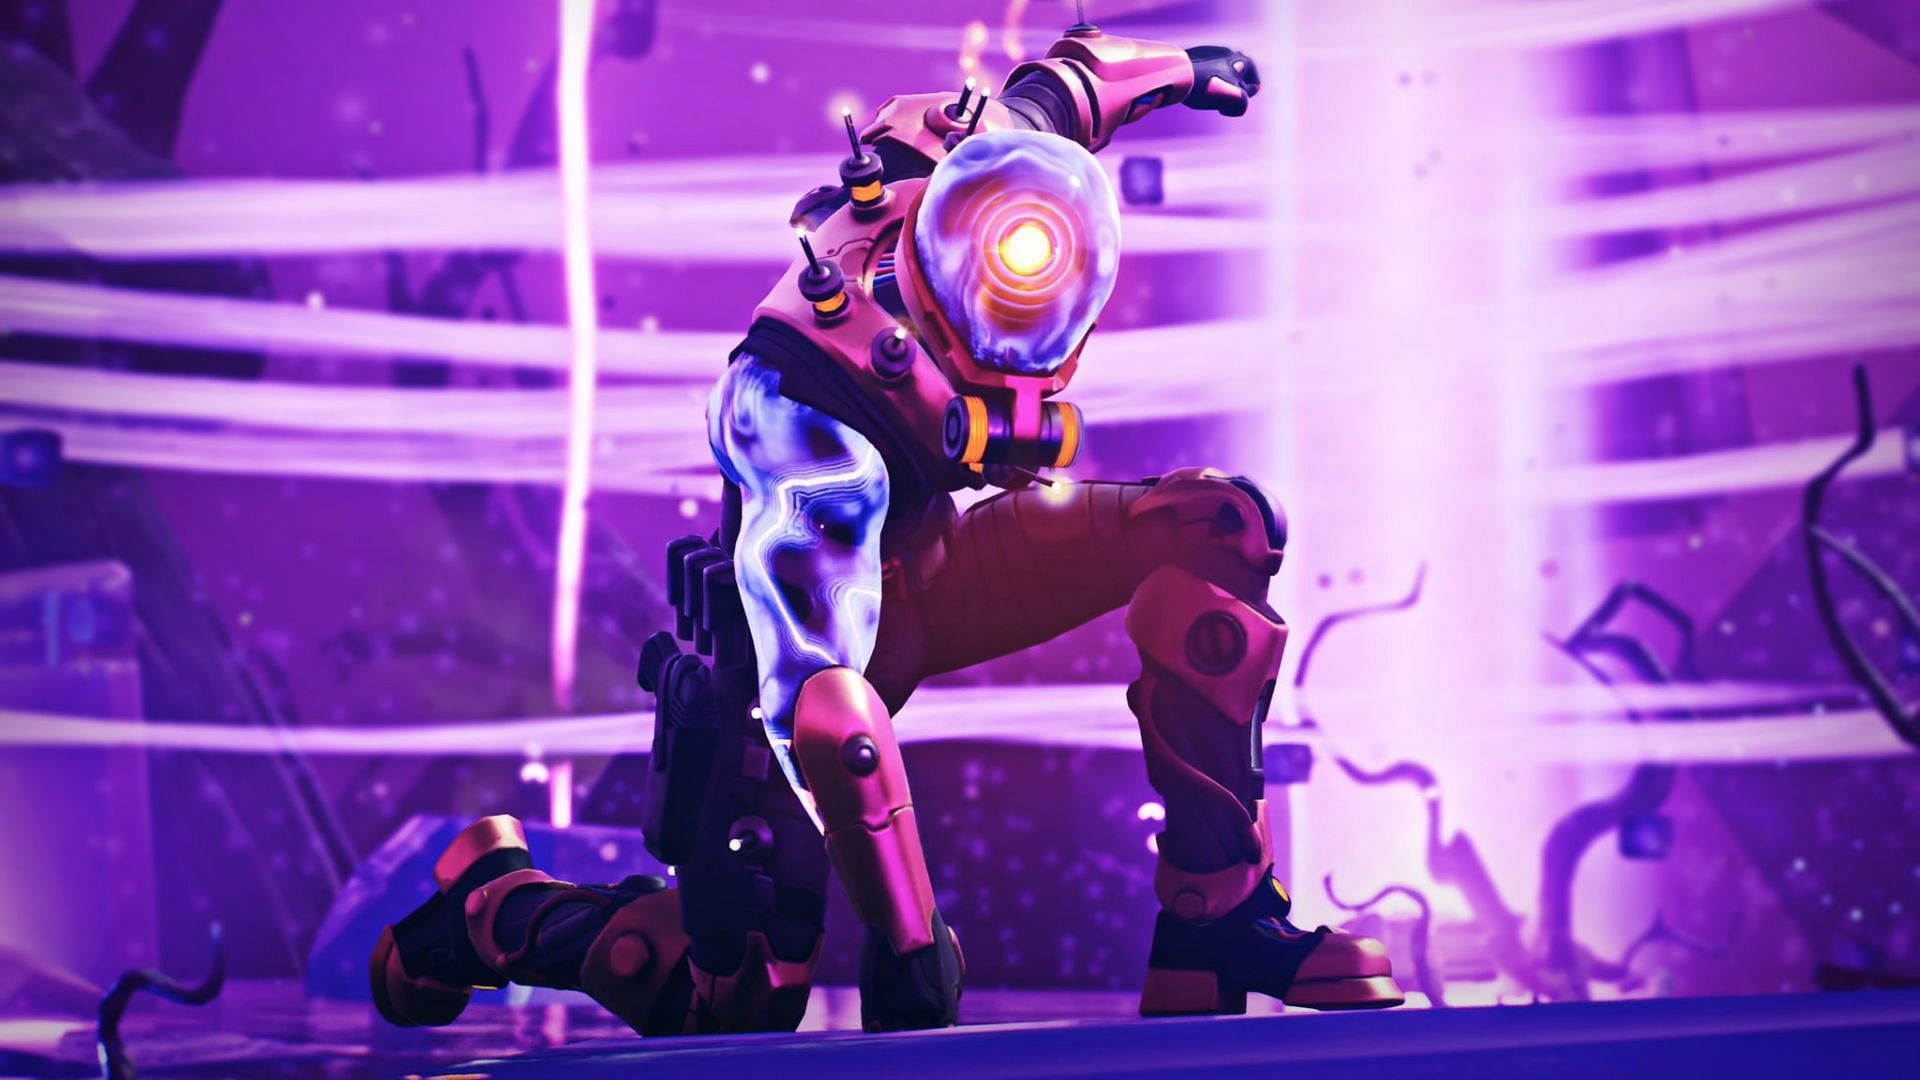 Fortnite makes changes to Storm Surge before FNCS Grand Finals, community left perplexed